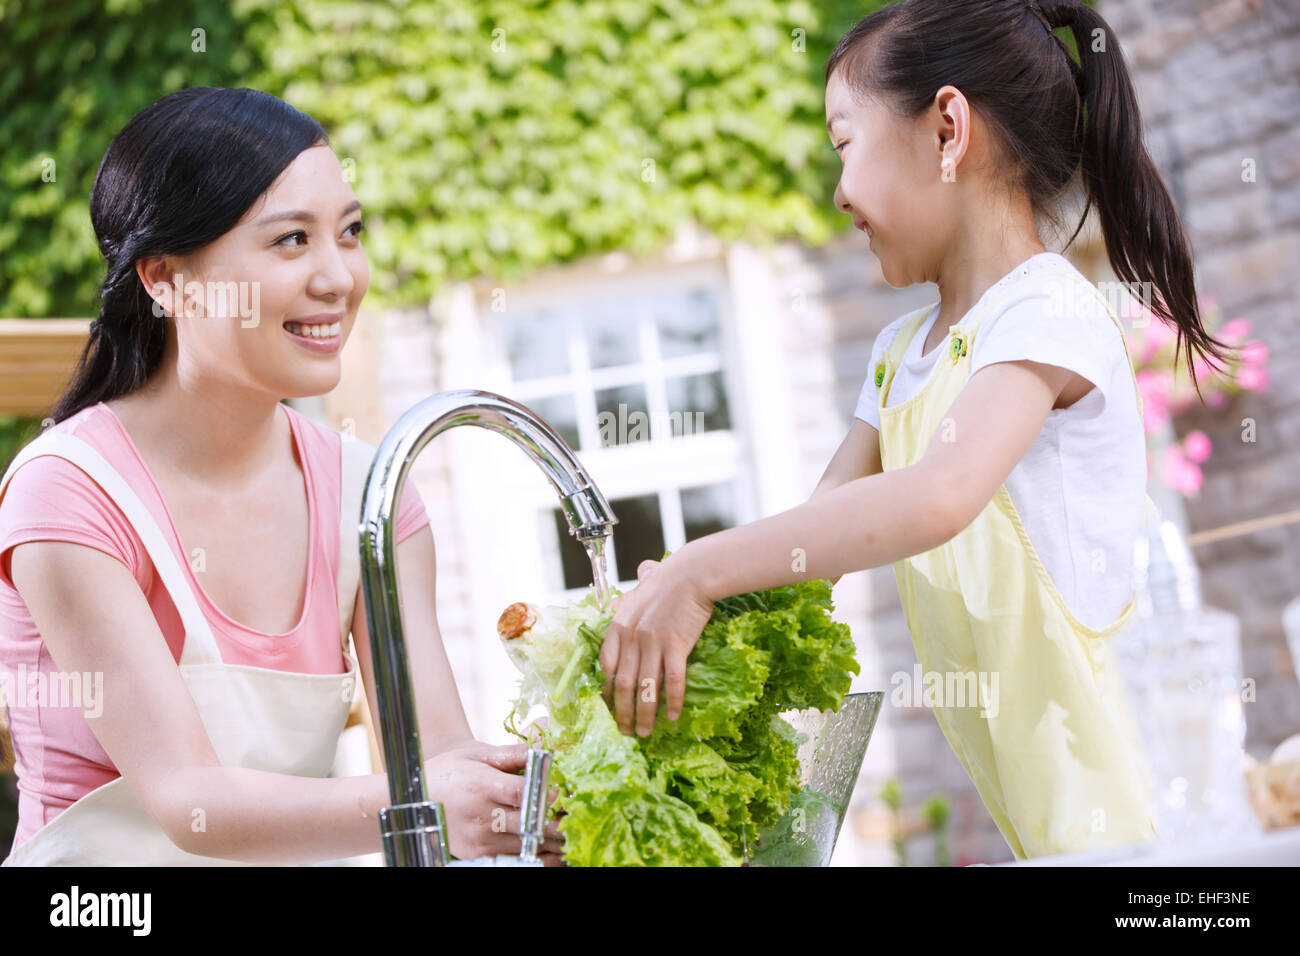 Mother and daughter prepare ingredients in outdoor kitchen Stock Photo